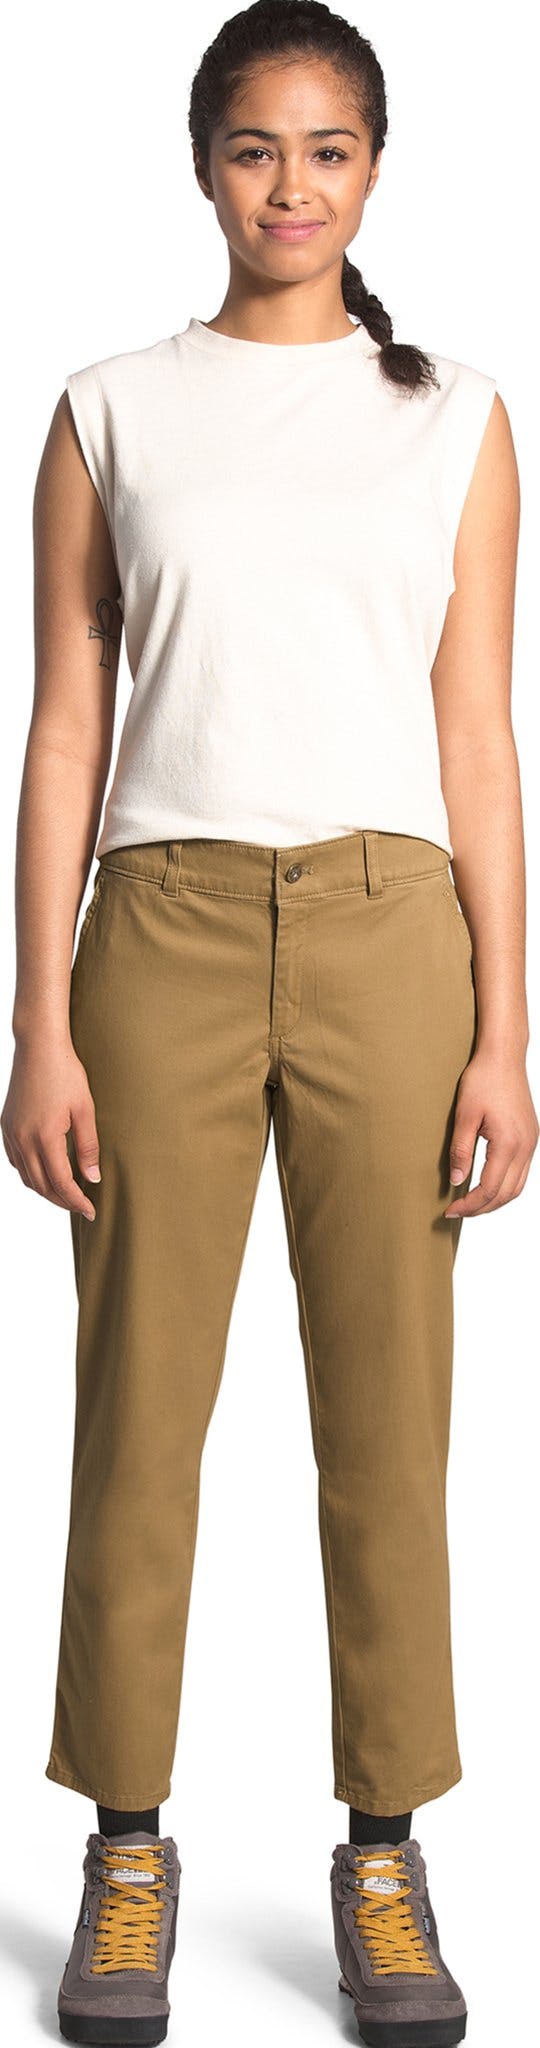 Product image for Motion Xd Ankle Chino - Women's